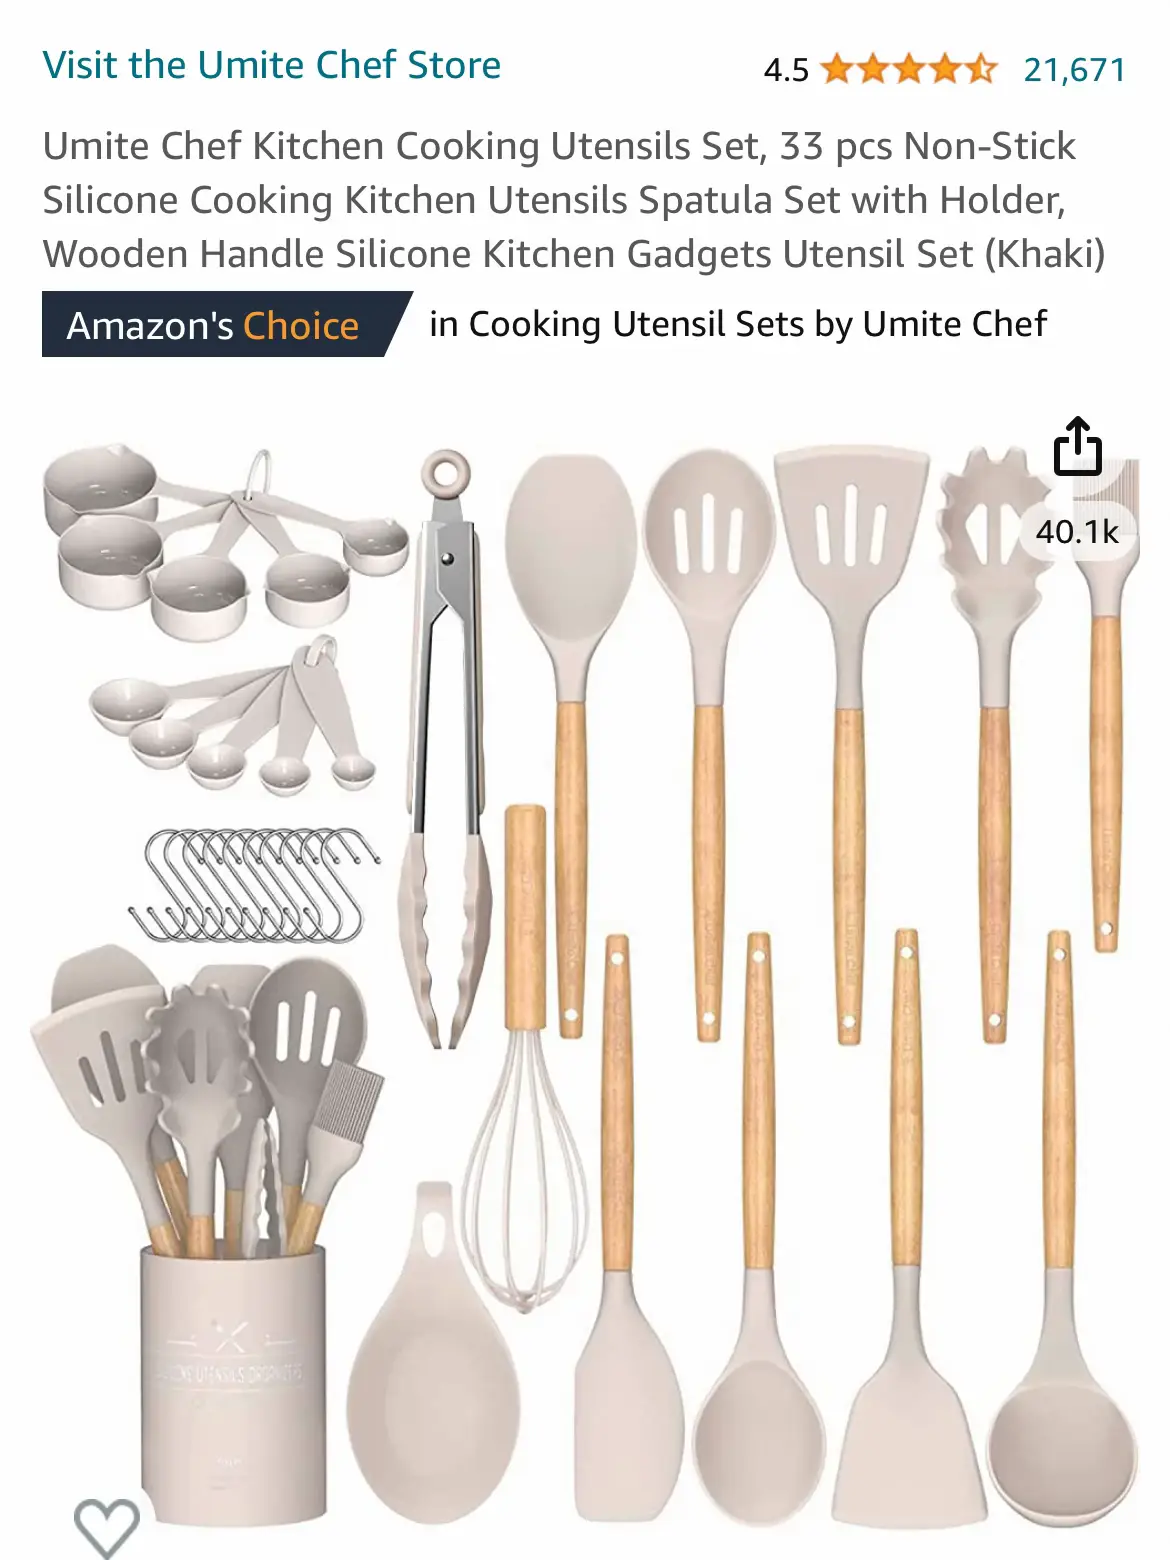 WEDDING REGISTRY: KITCHEN EDITION  Gallery posted by hadley culp